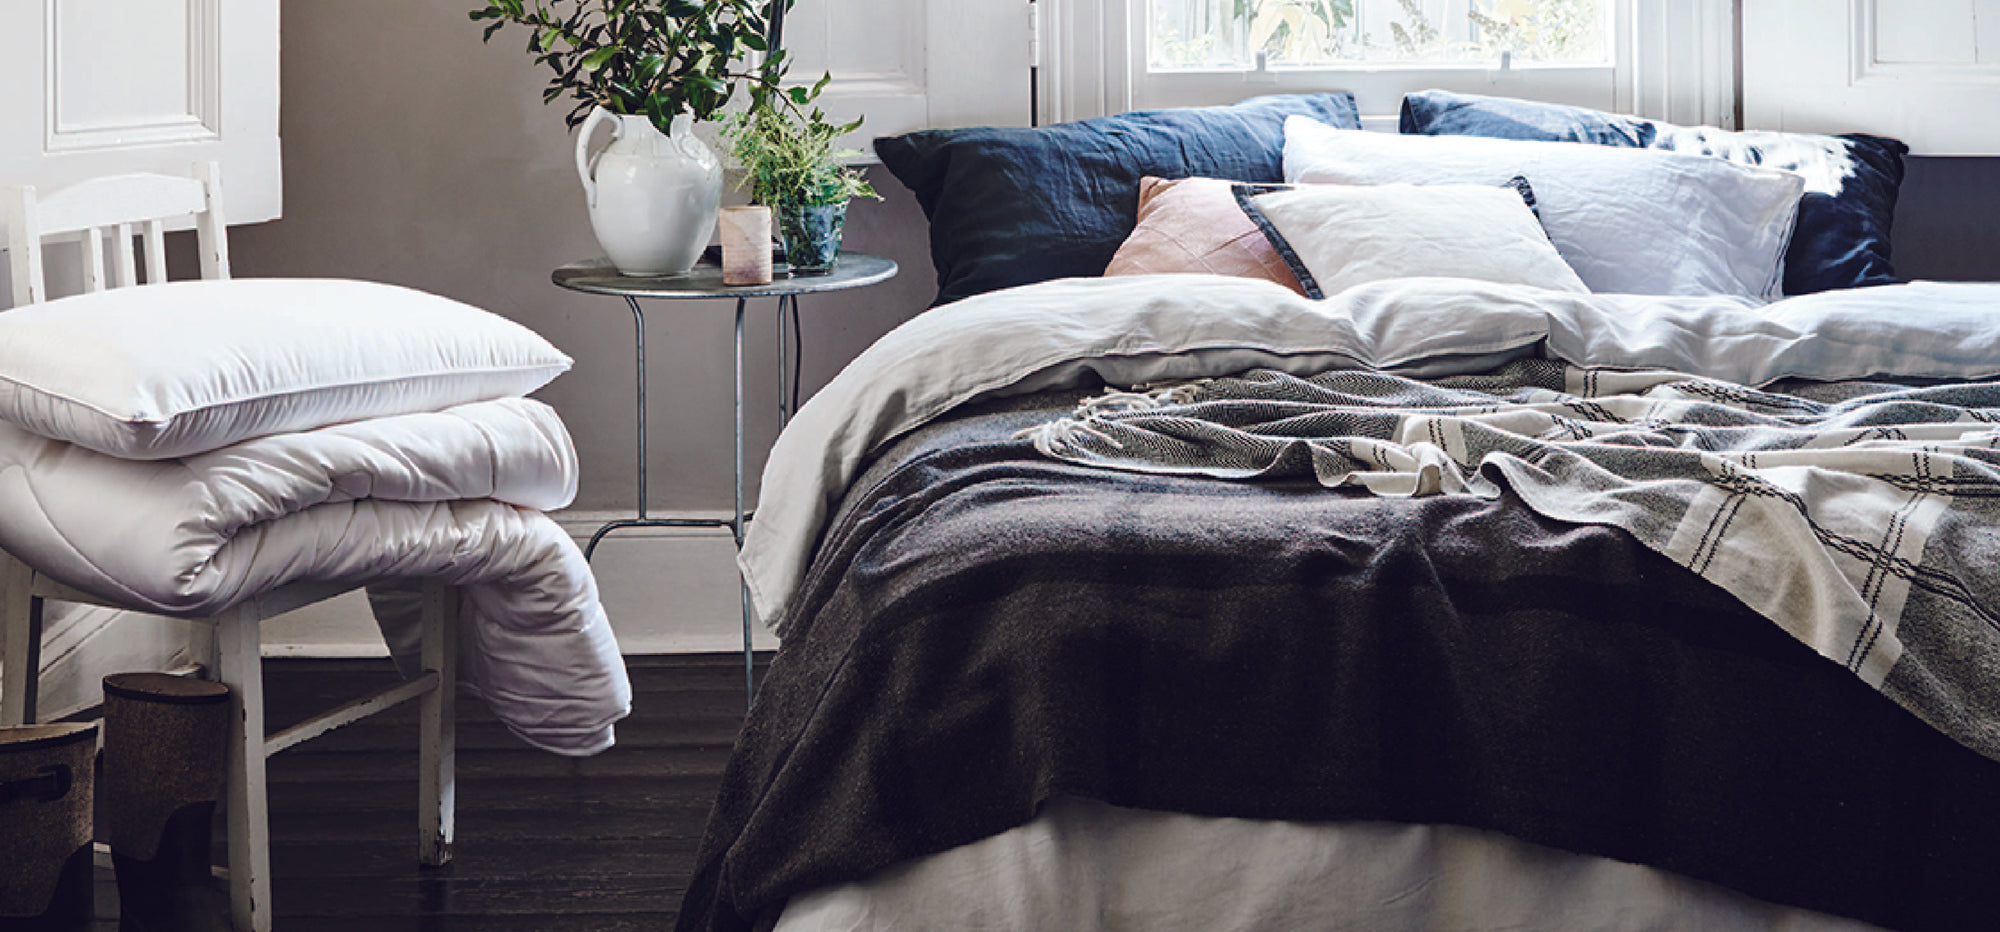 How to set up a guest bedroom